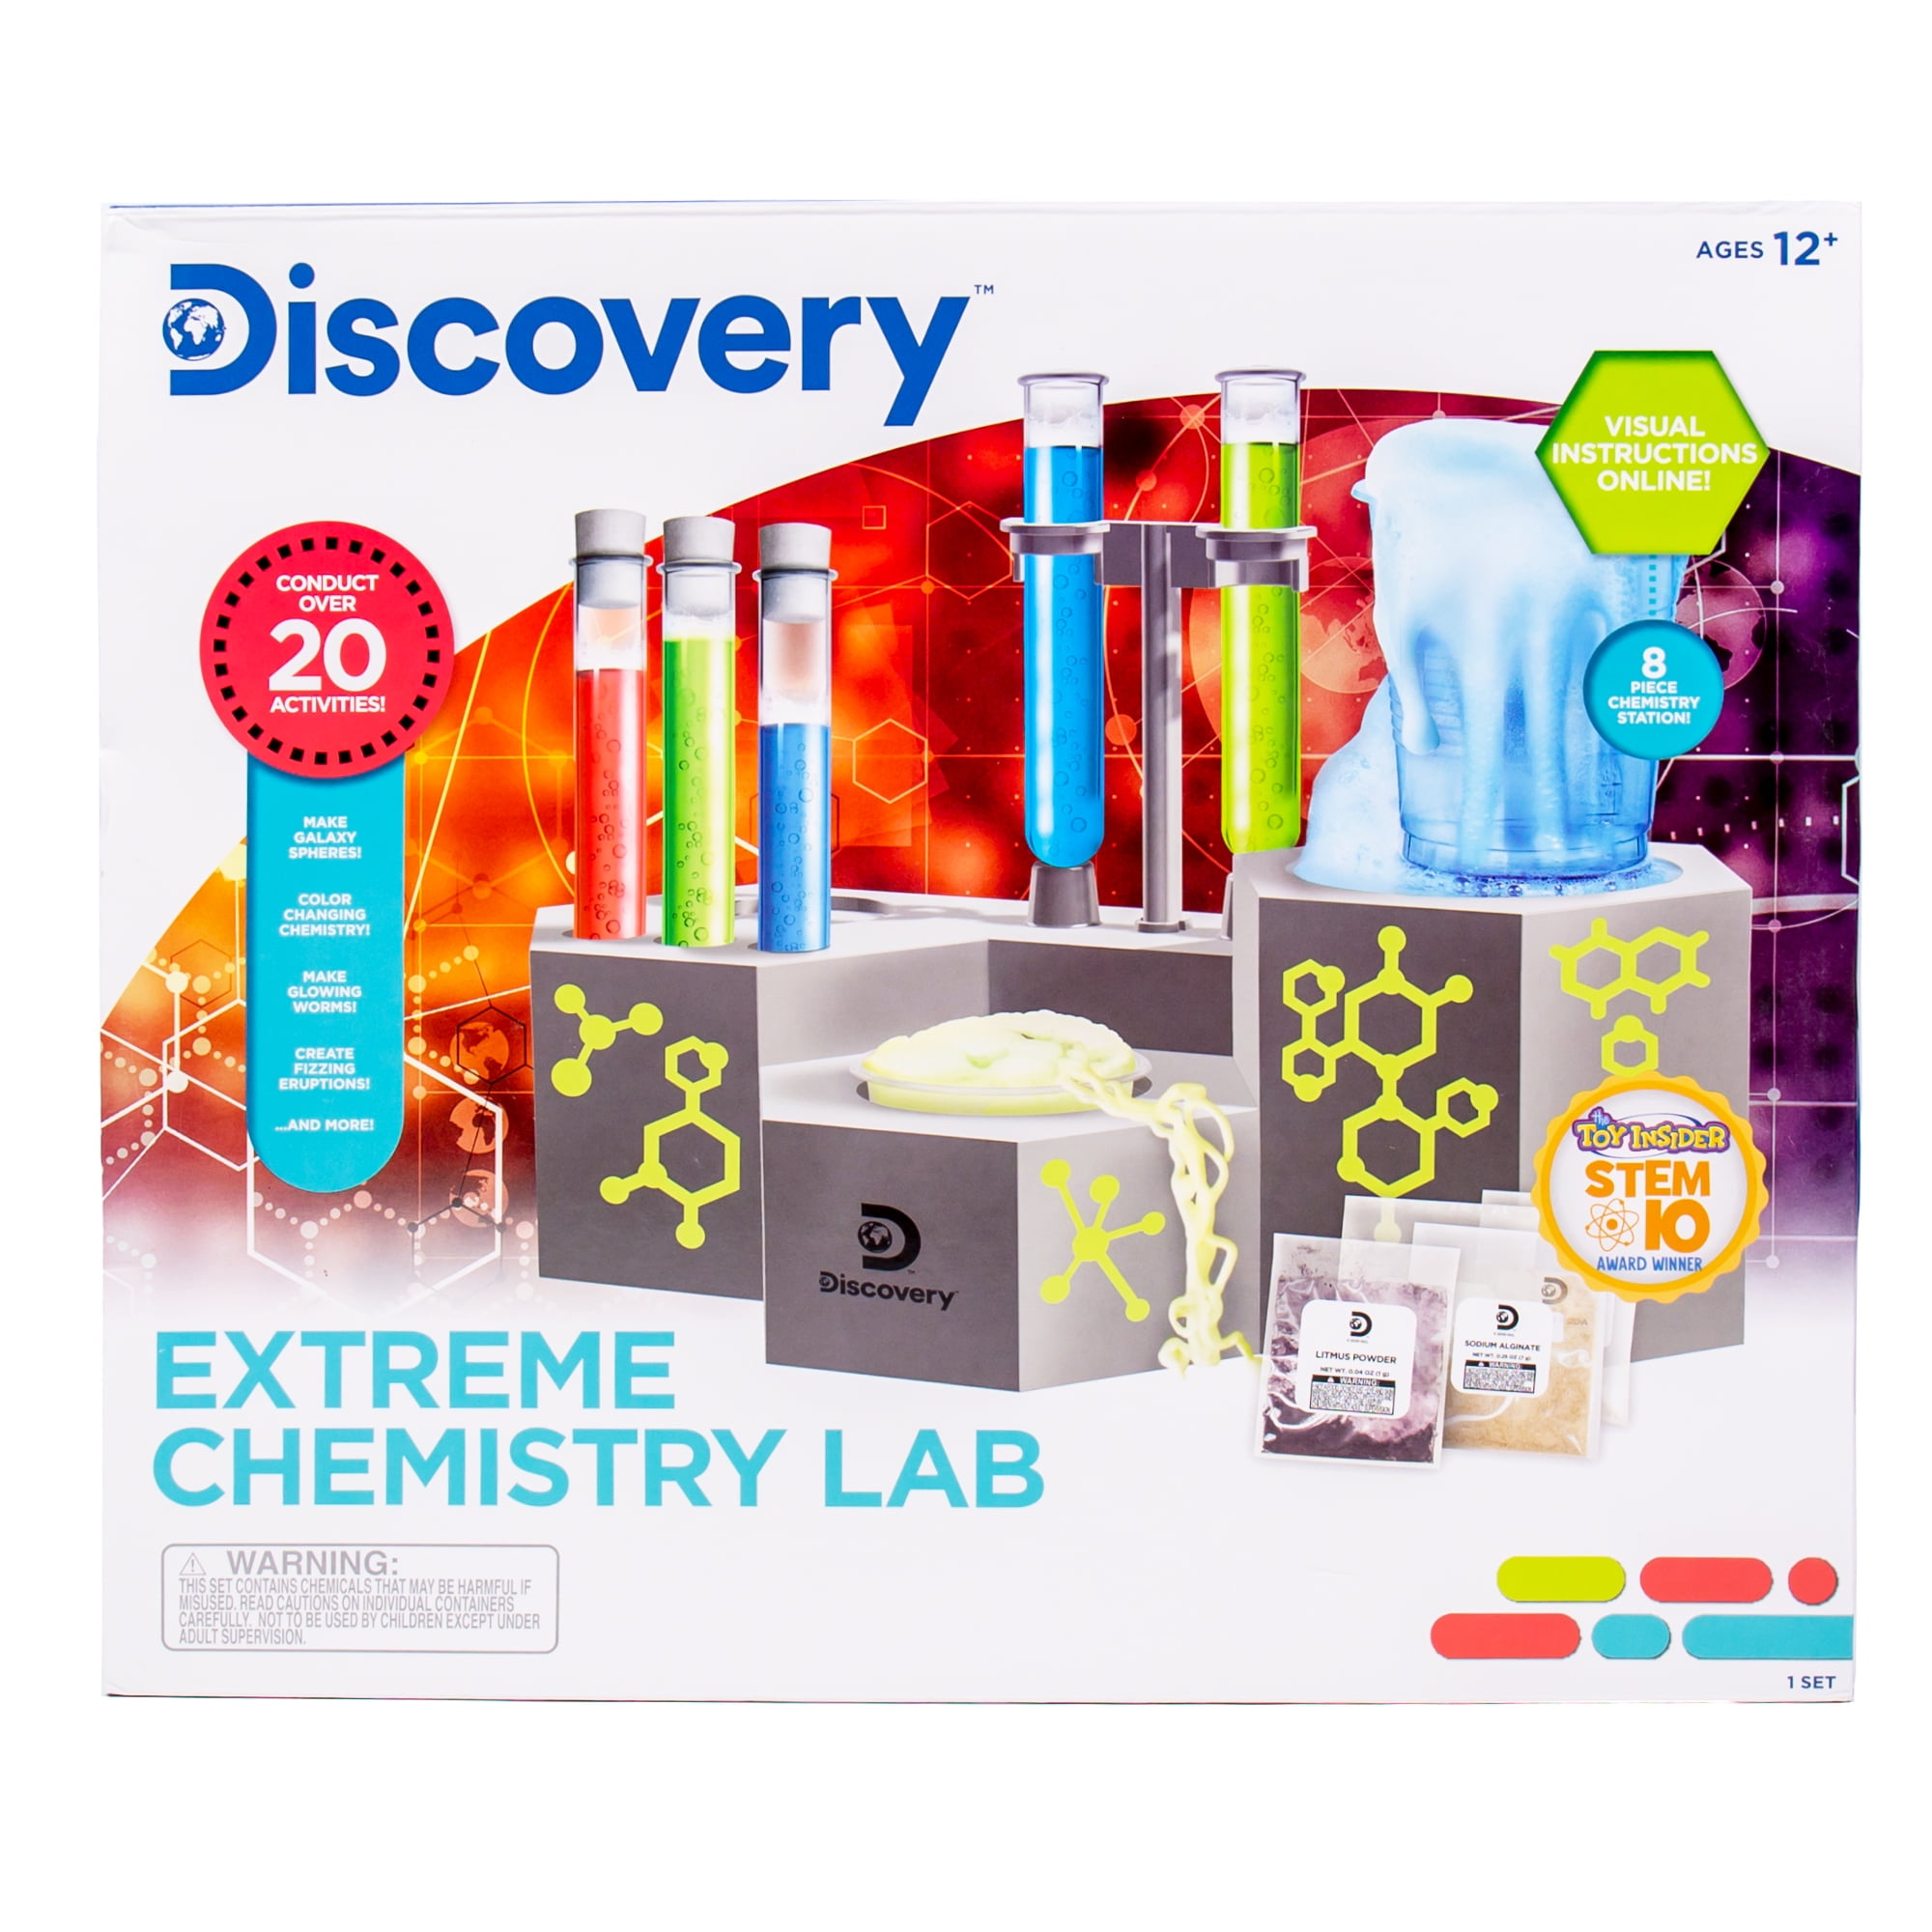 DIY Crystal Growing Science Experiment Kit for Kids W/Light Up Display Dome 10+ 